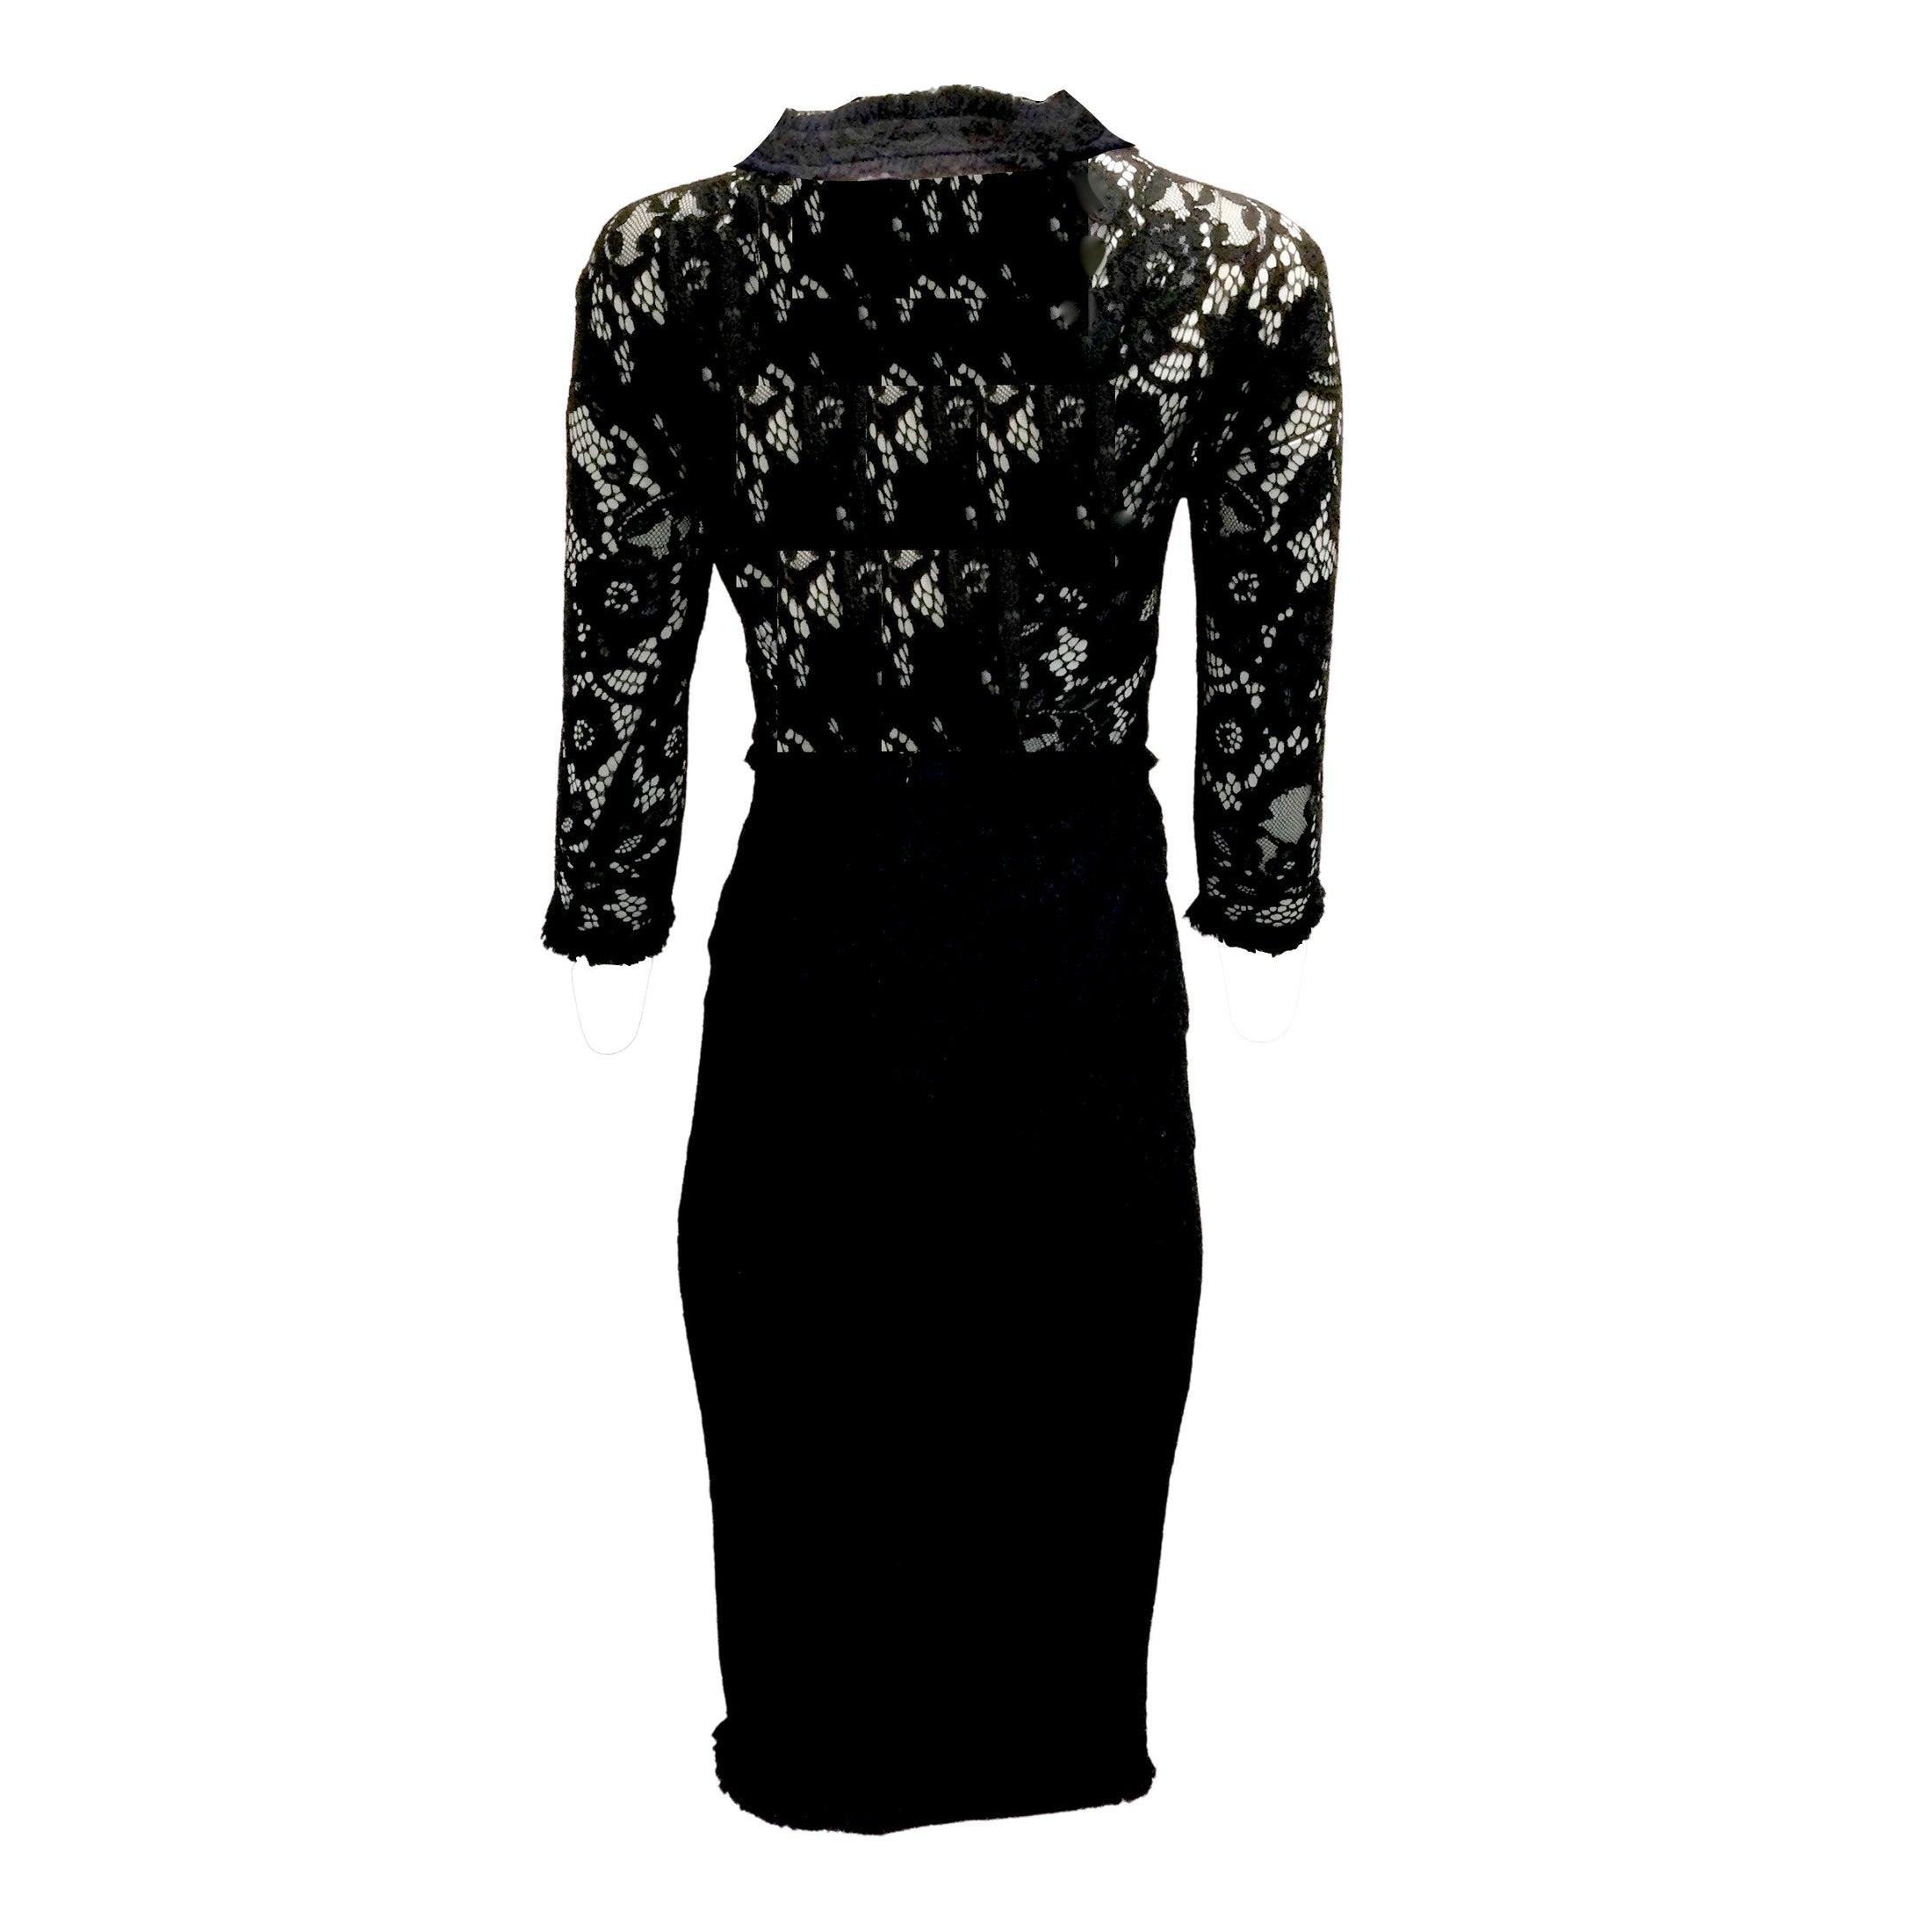 Alexis Black Lace Dress With Navy Blue Ruffled Trim